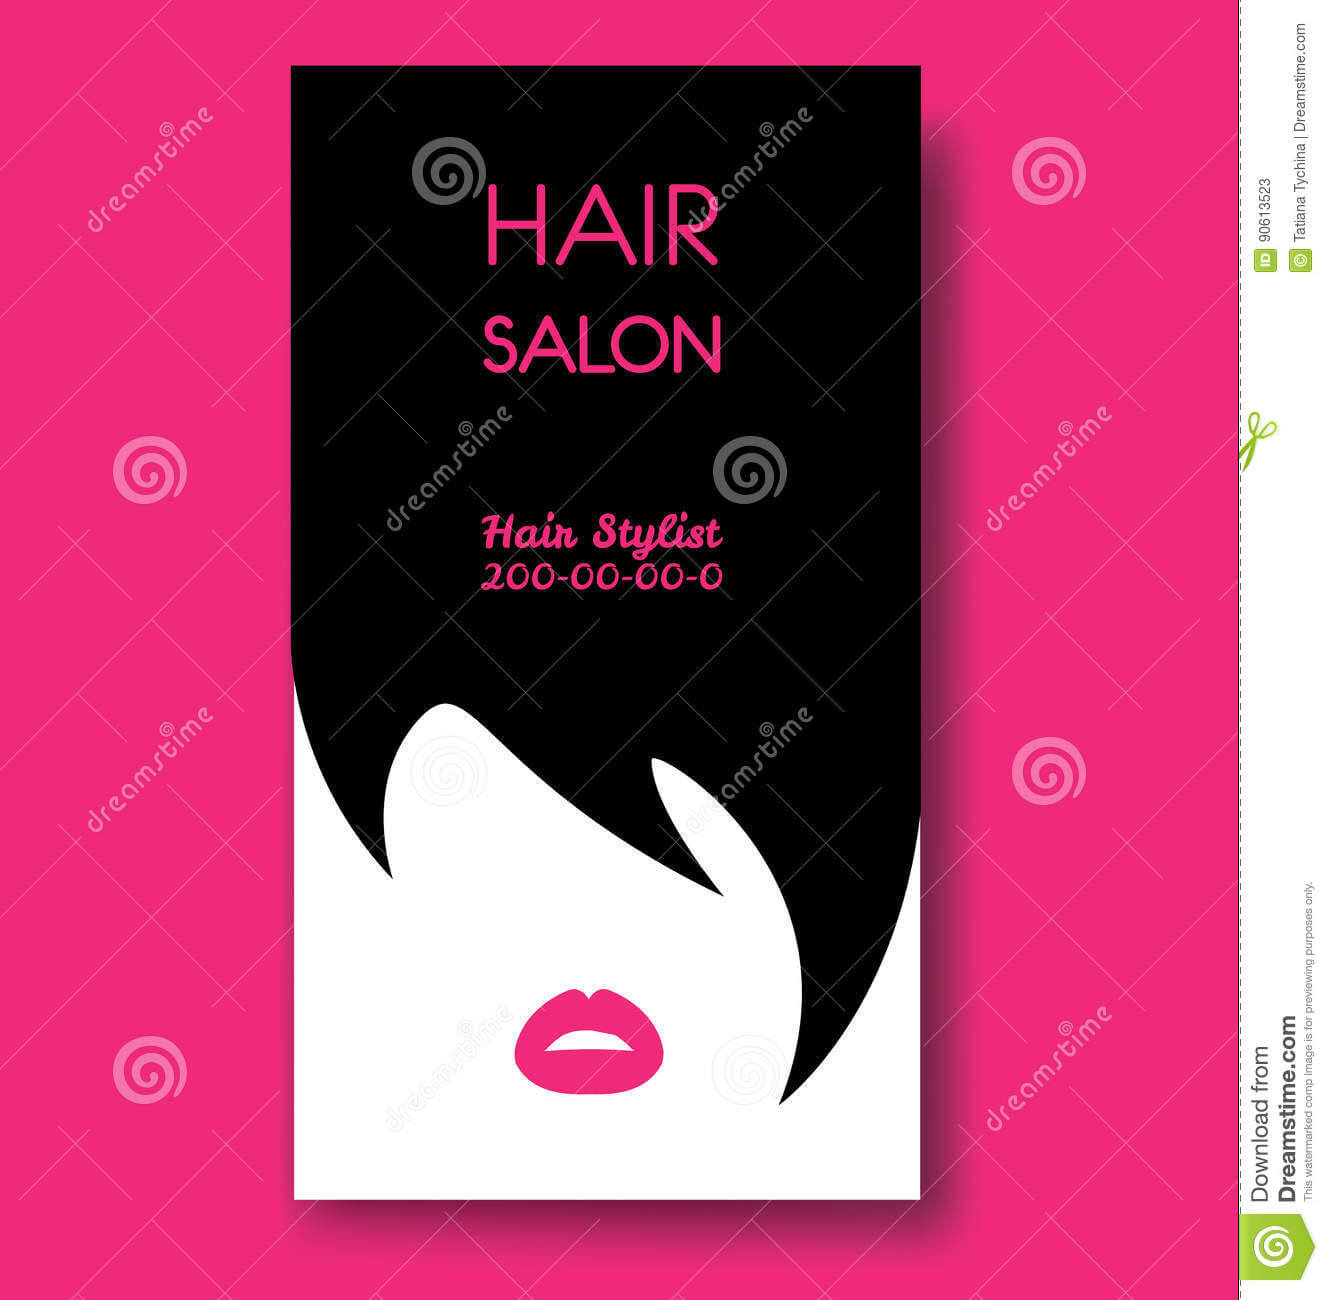 Hair Salon Business Card Templates With Black Hair And Regarding Hairdresser Business Card Templates Free